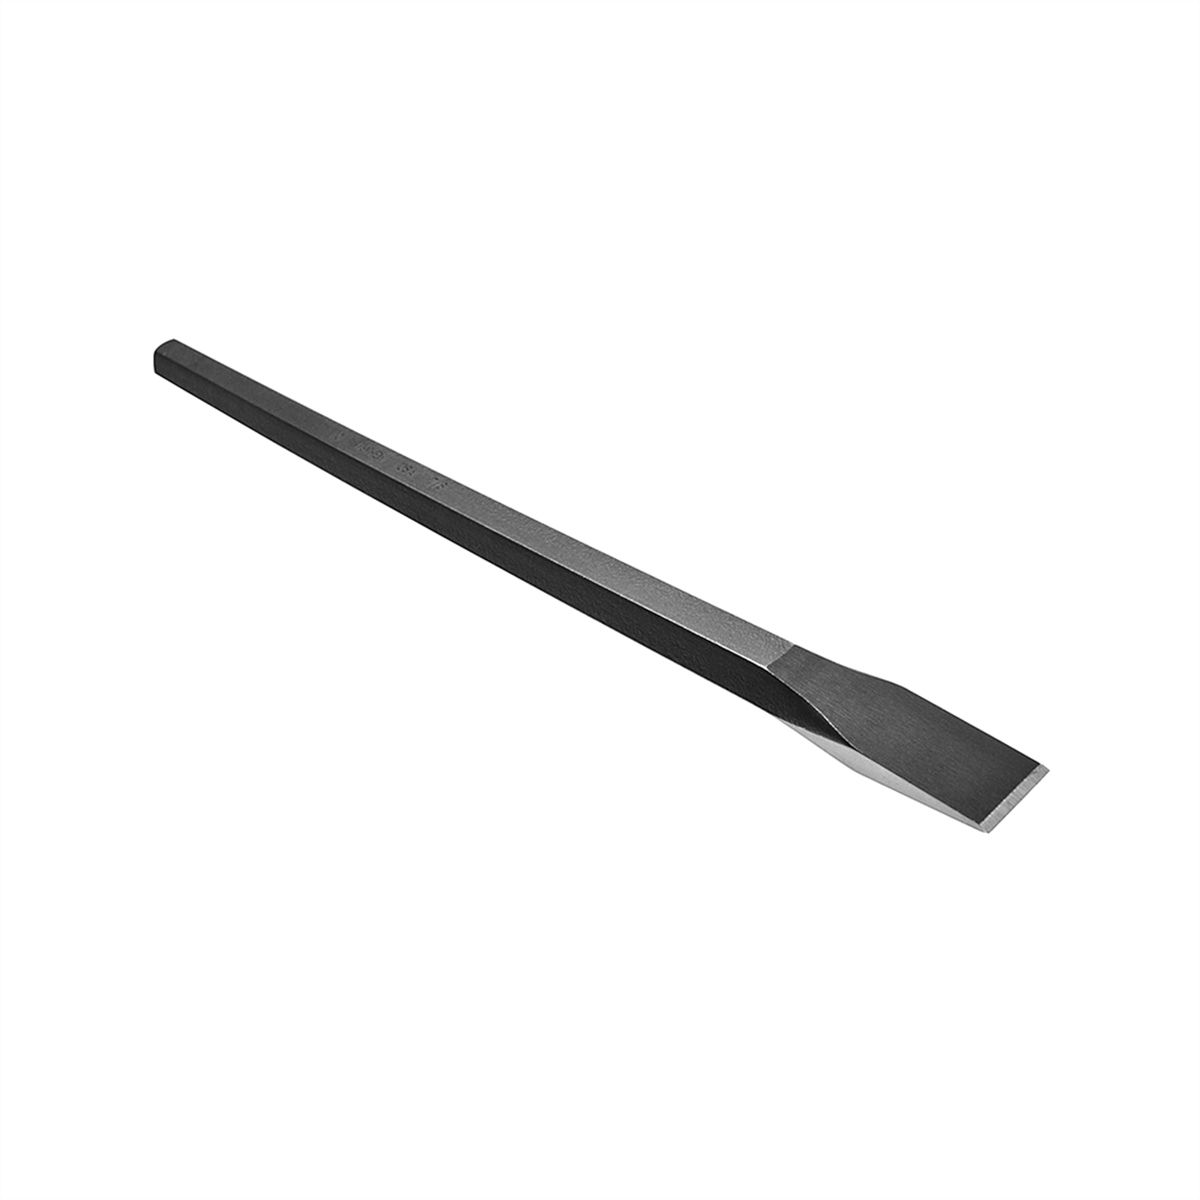 Black Oxide Cold Chisel - 1 In x 18 In